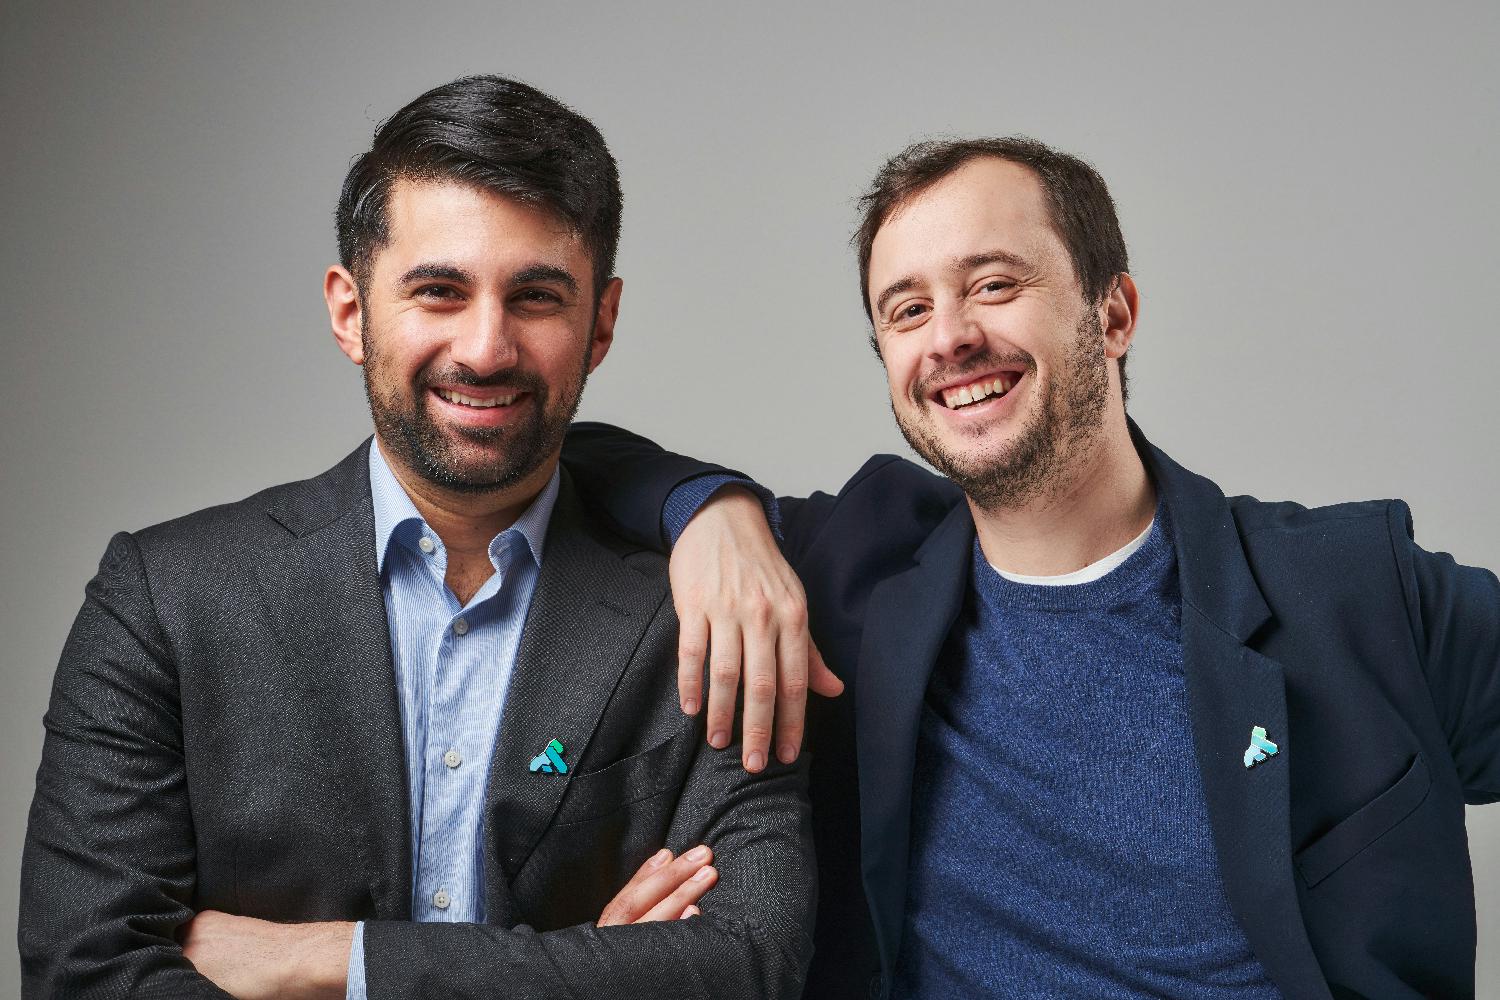 Kong's co-founders. CTO, Marco Palladino (left), and CEO, Aghi Marietti (right).